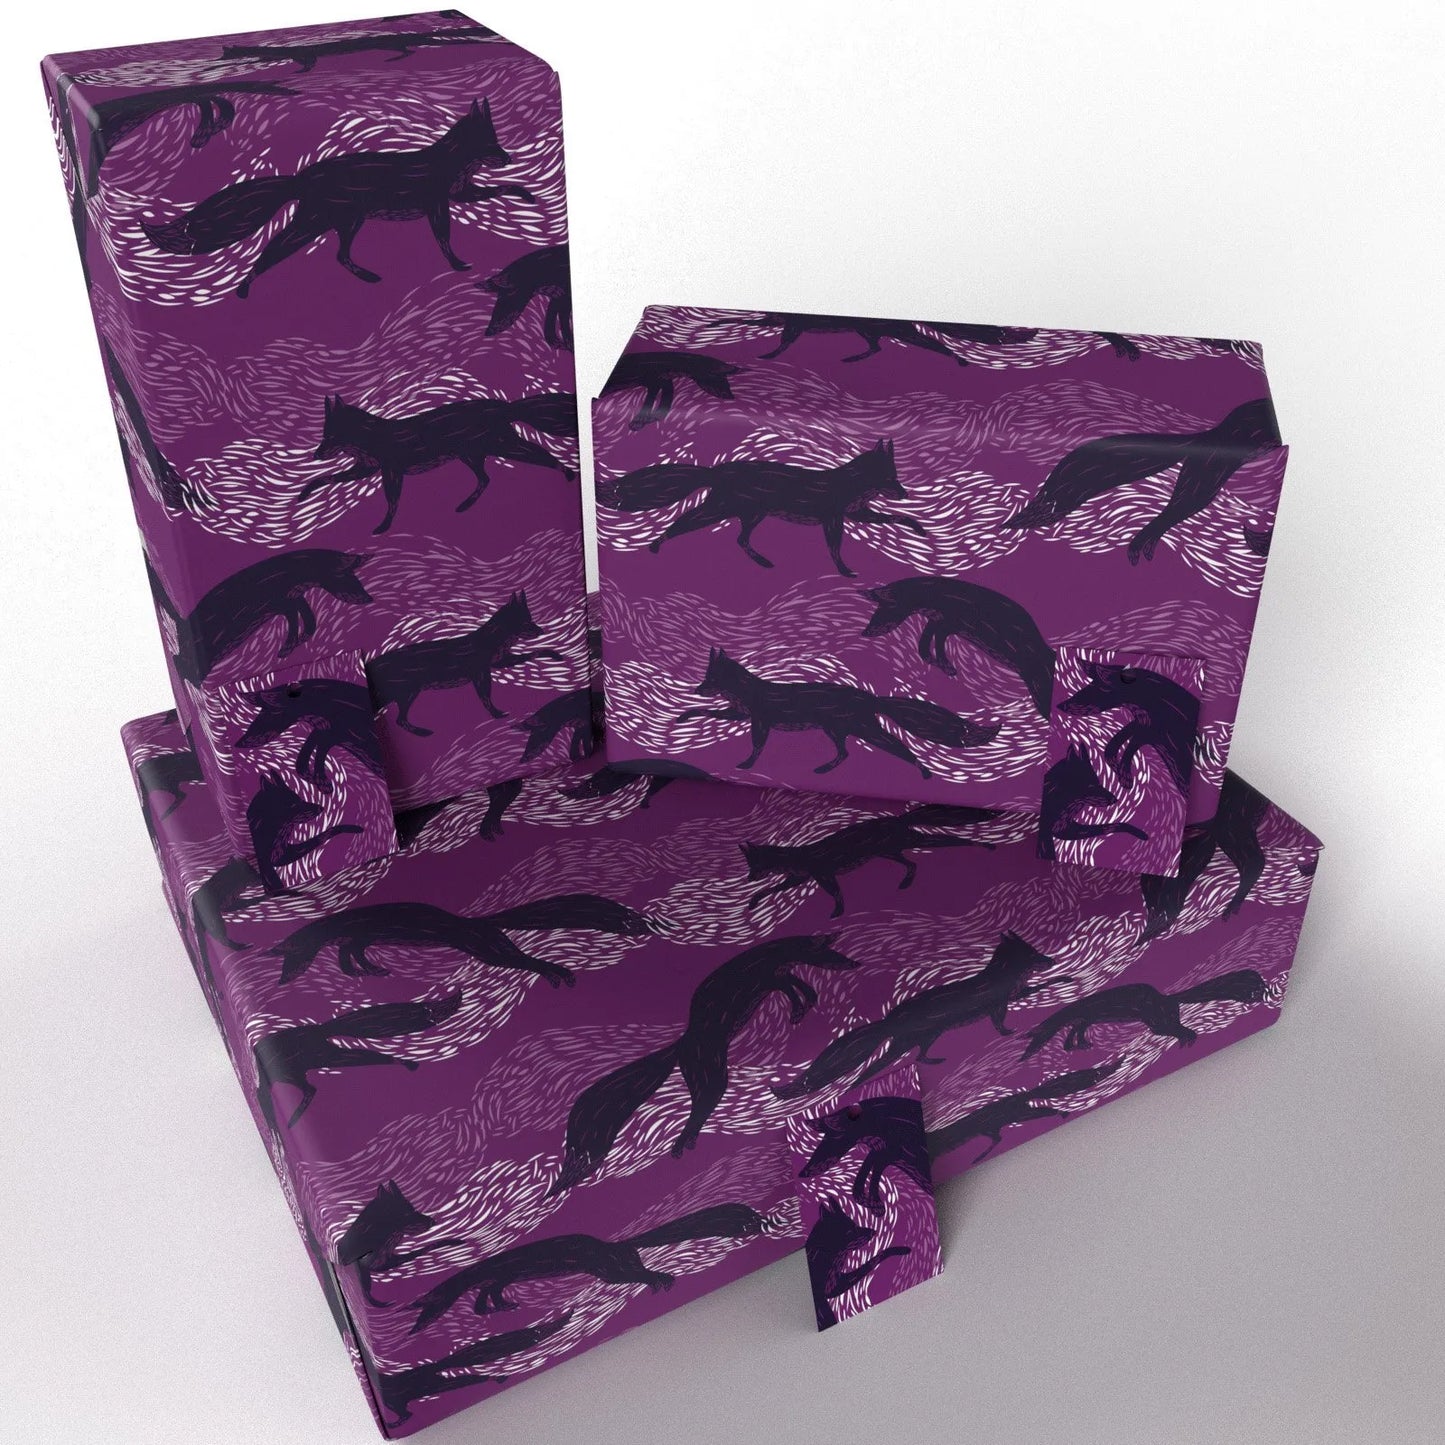 Rewrapped Wrapping Paper • 100% Recycled • Vegan Ink